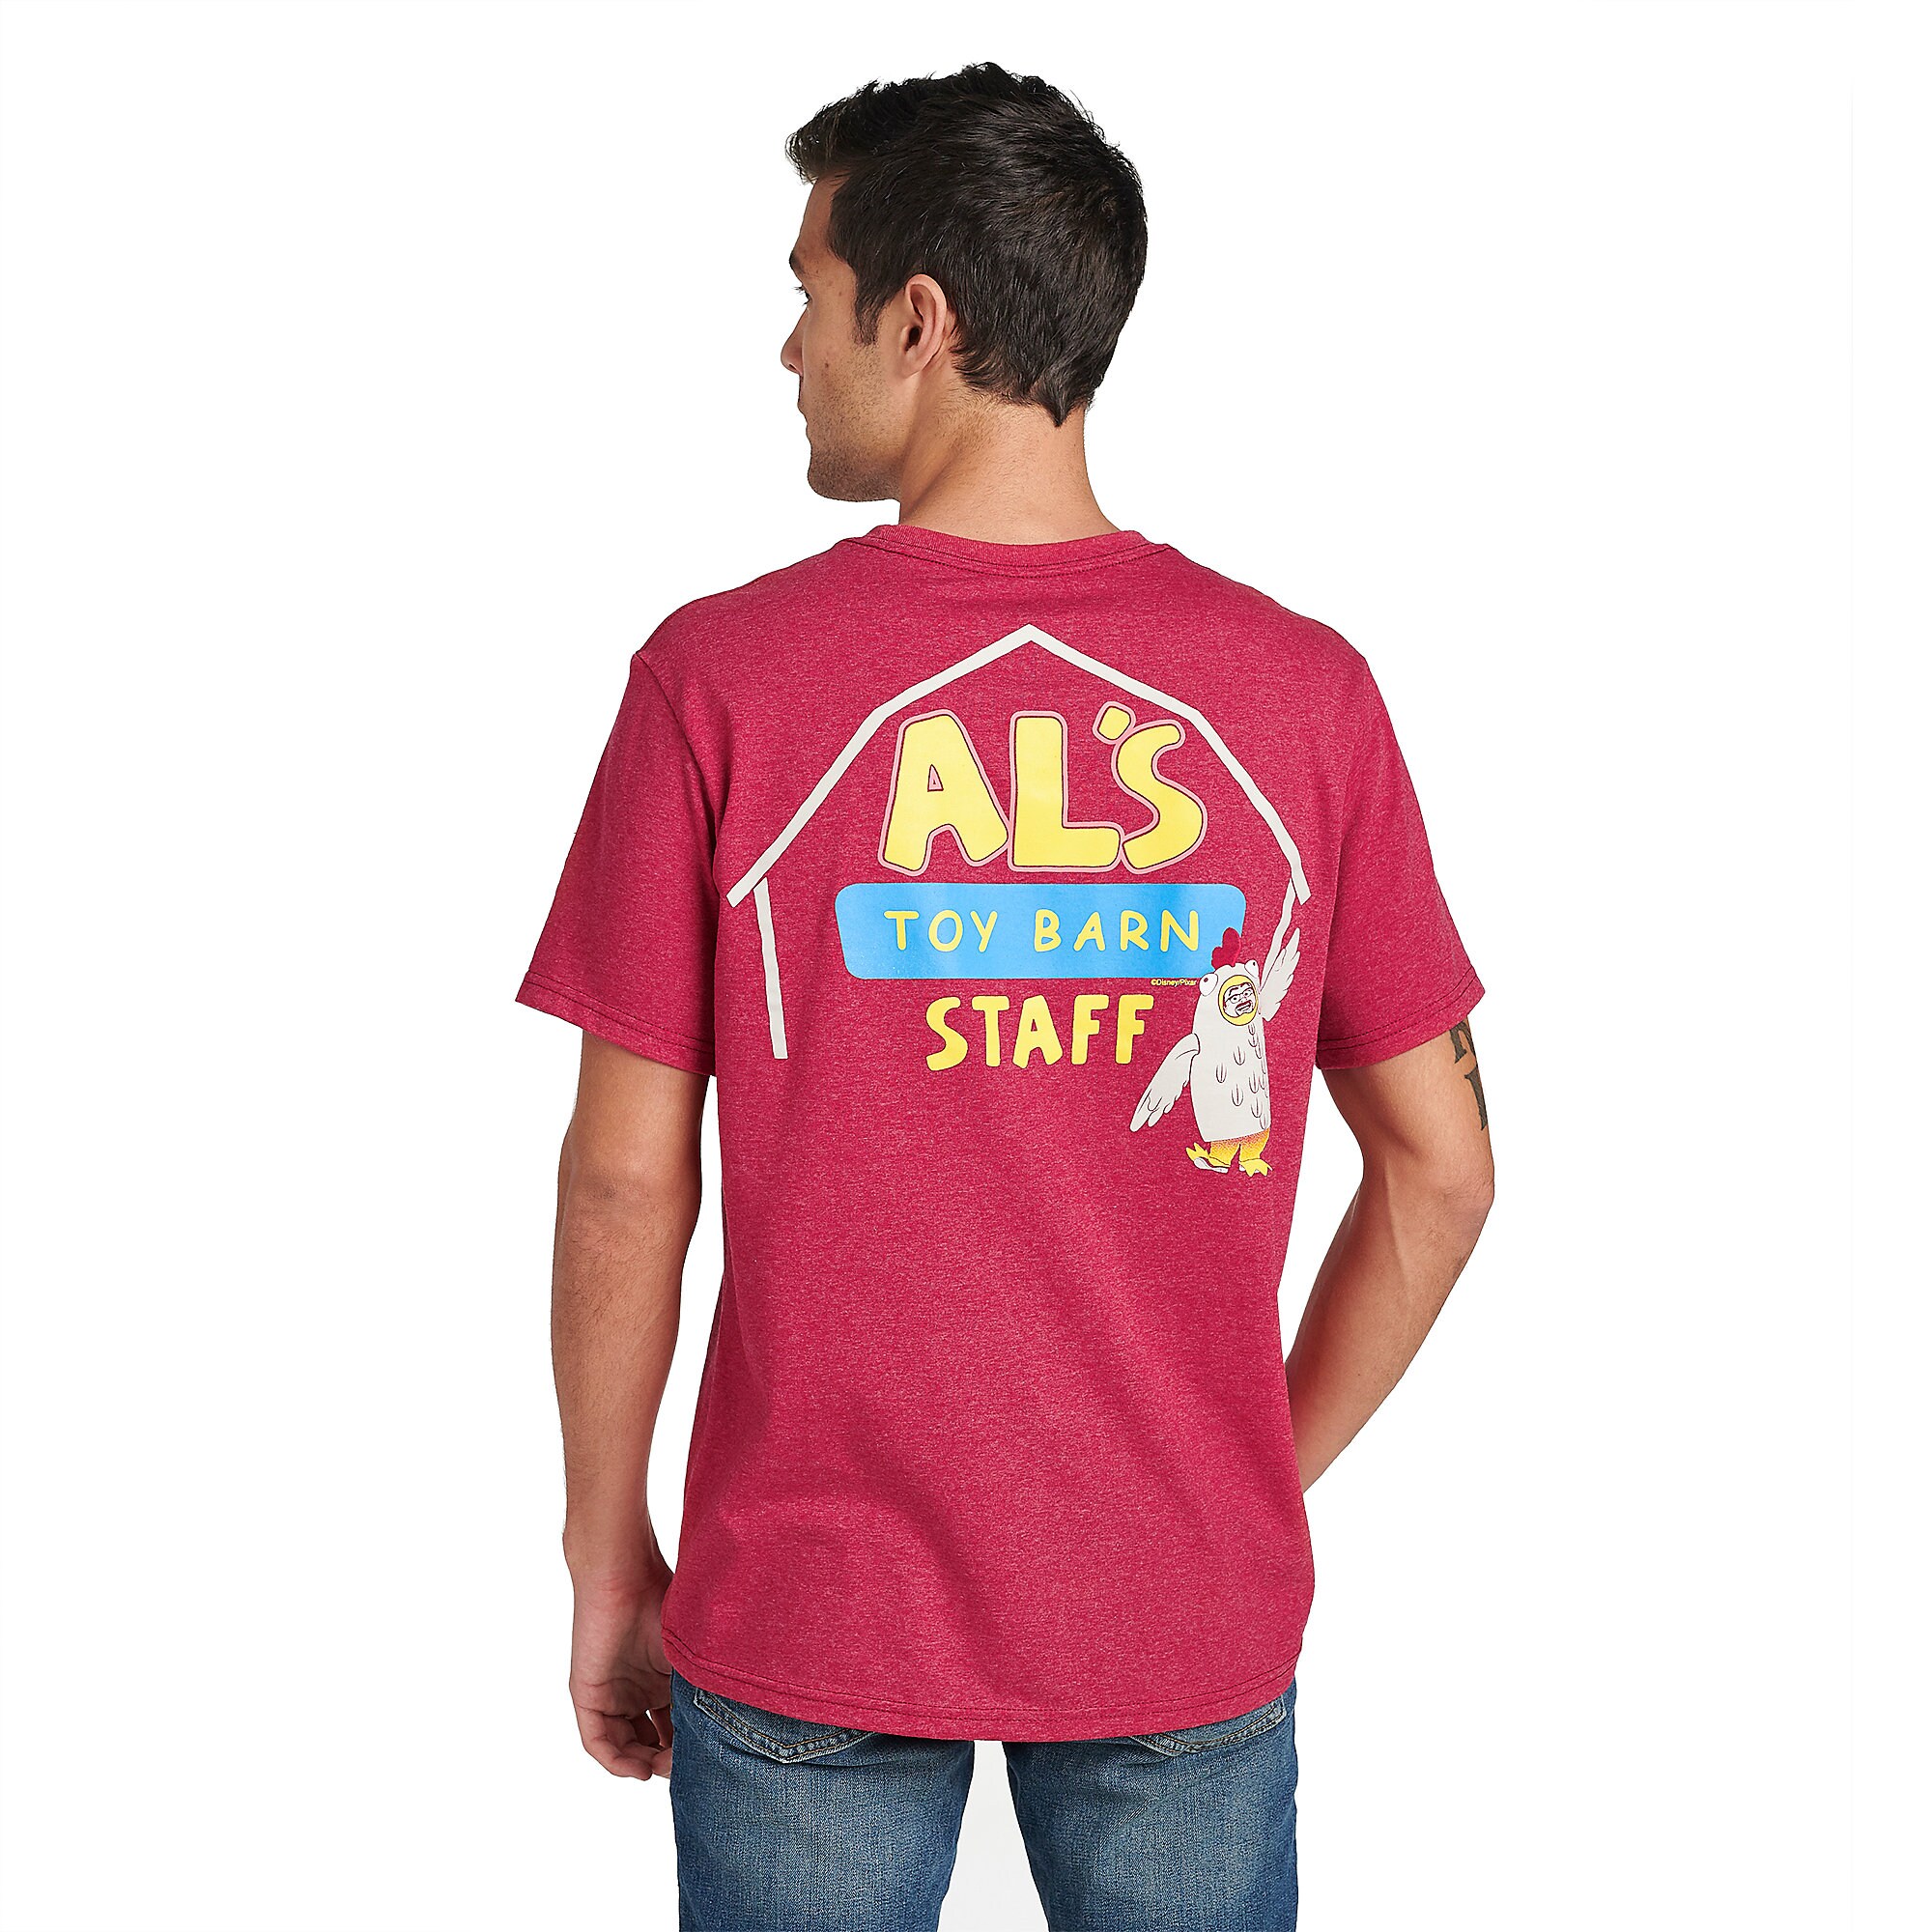 Al's Toy Barn Staff T-Shirt for Men - Toy Story